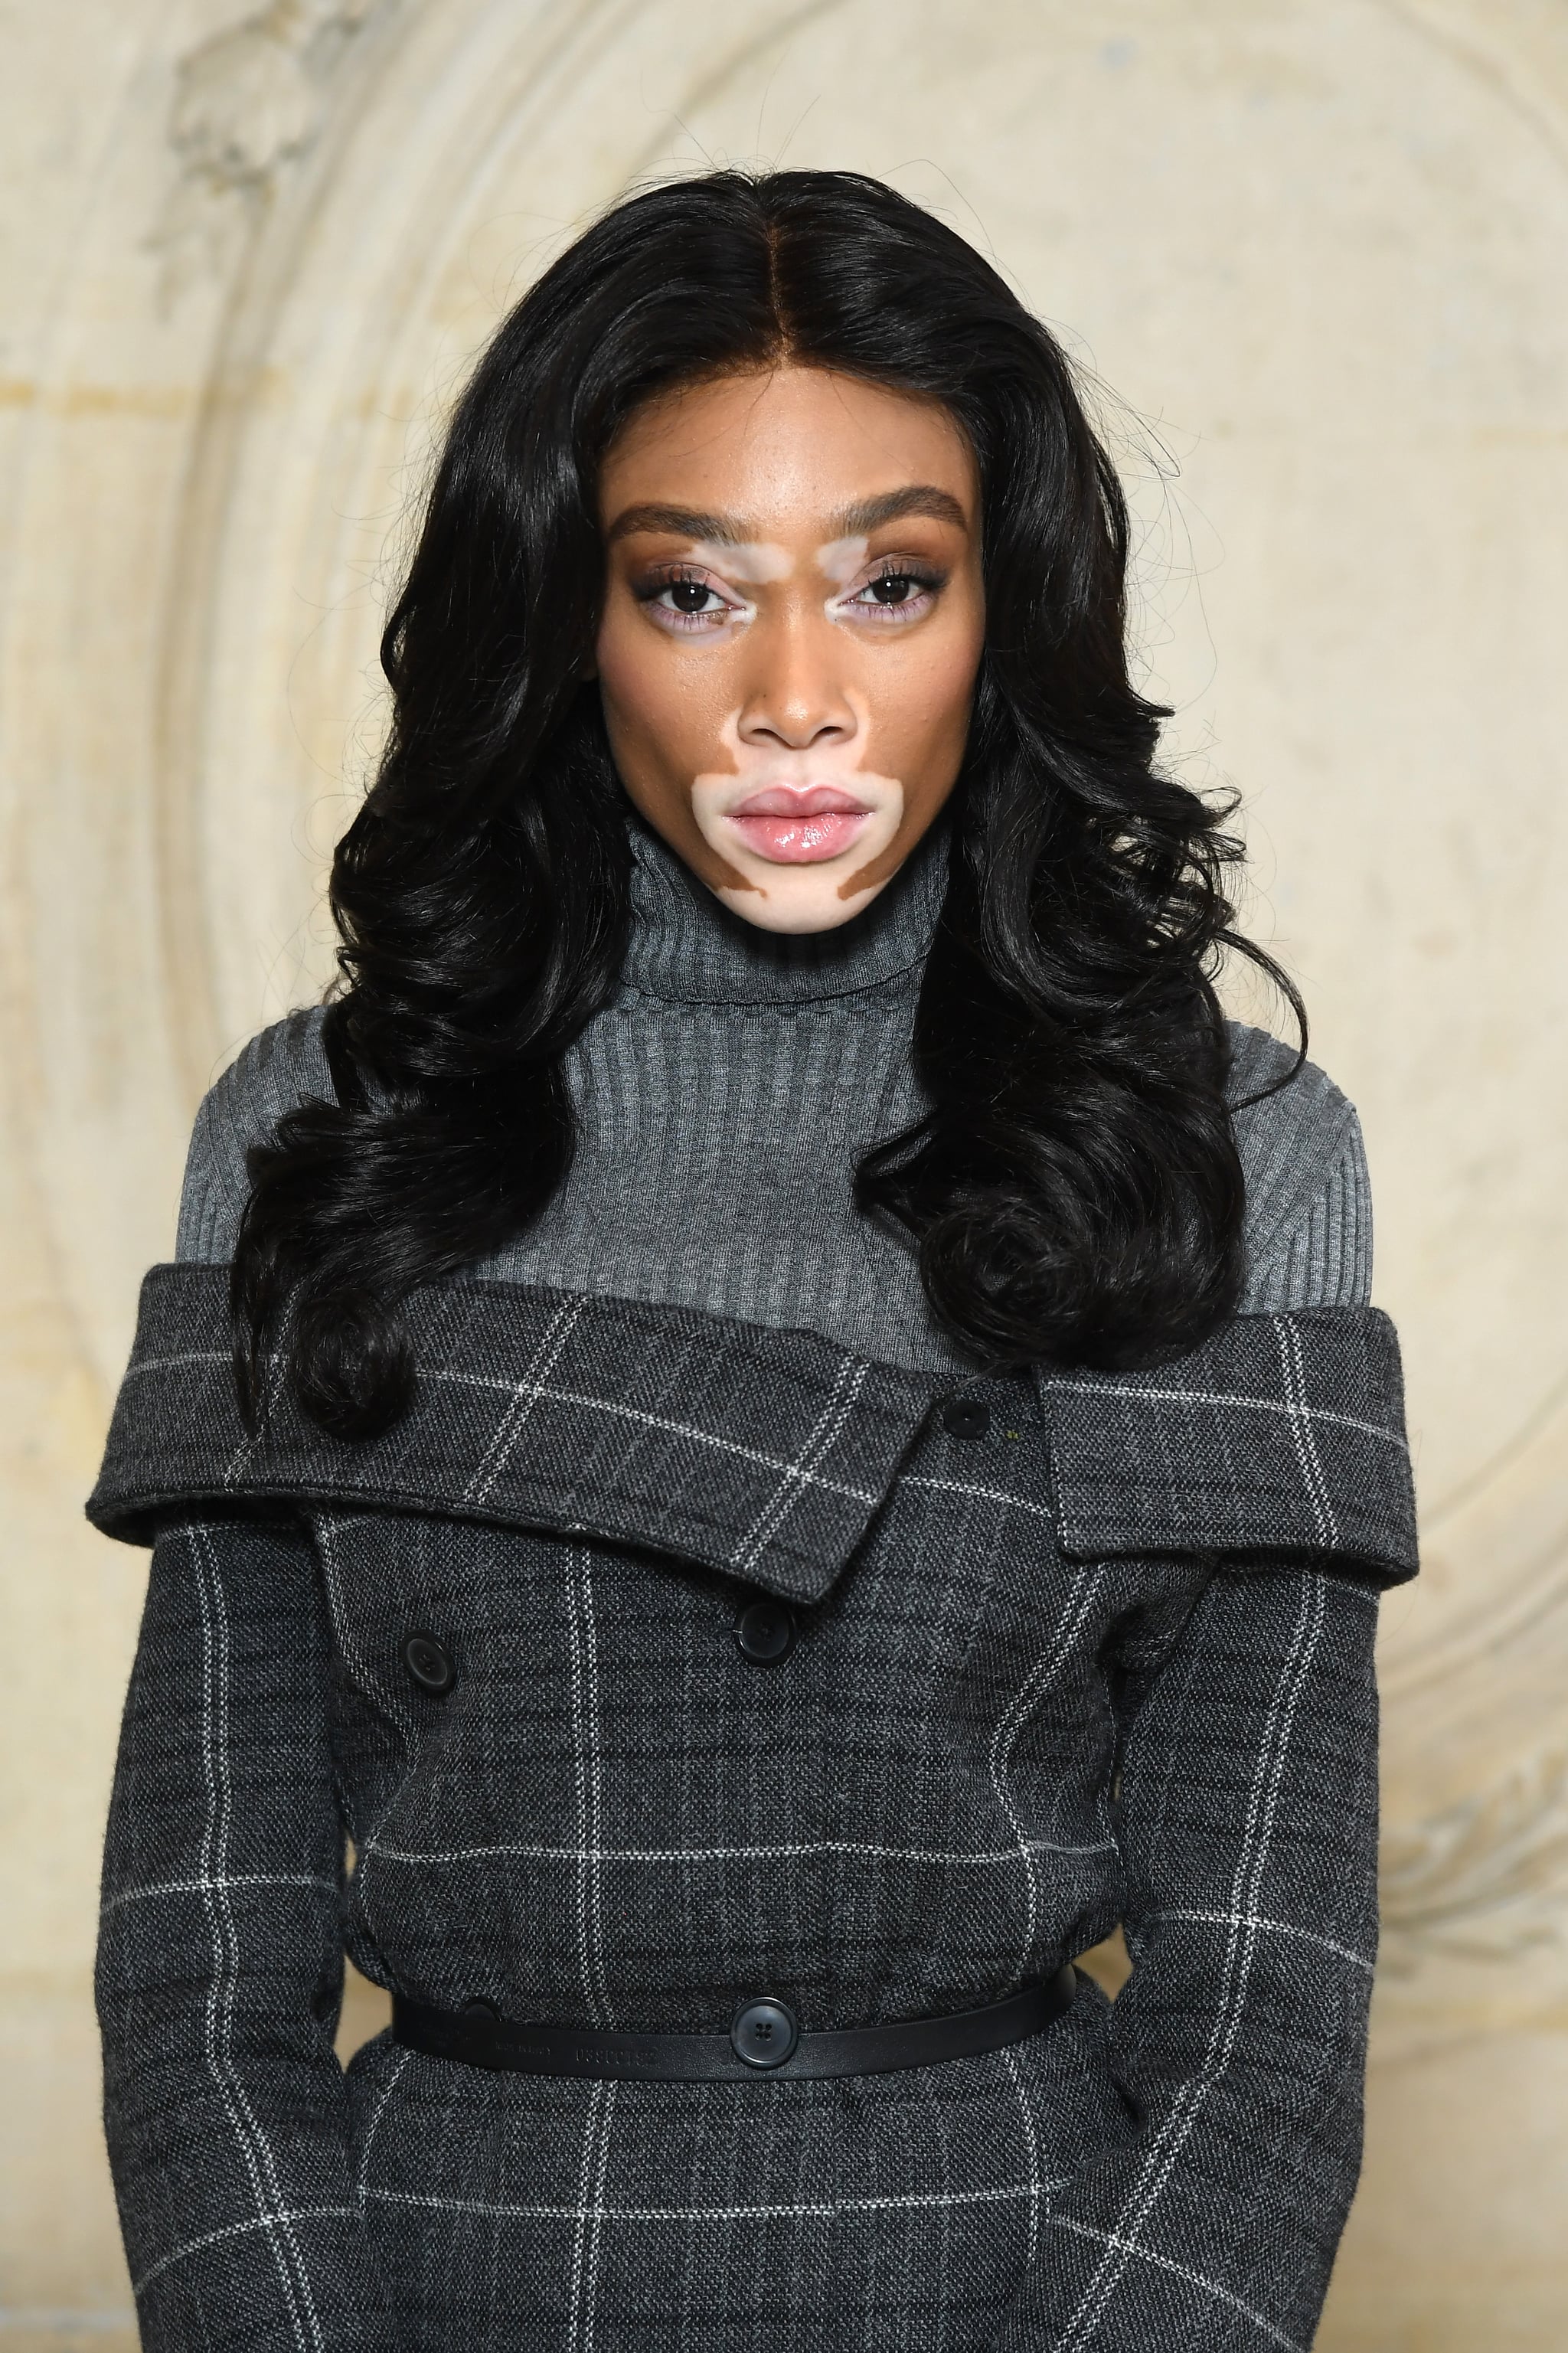 PARIS, FRANCE - FEBRUARY 27:  Winnie Harlow attends the Christian Dior show as part of the Paris Fashion Week Womenswear Fall/Winter 2018/2019 on February 27, 2018 in Paris, France.  (Photo by Pascal Le Segretain/Getty Images for Christian Dior)